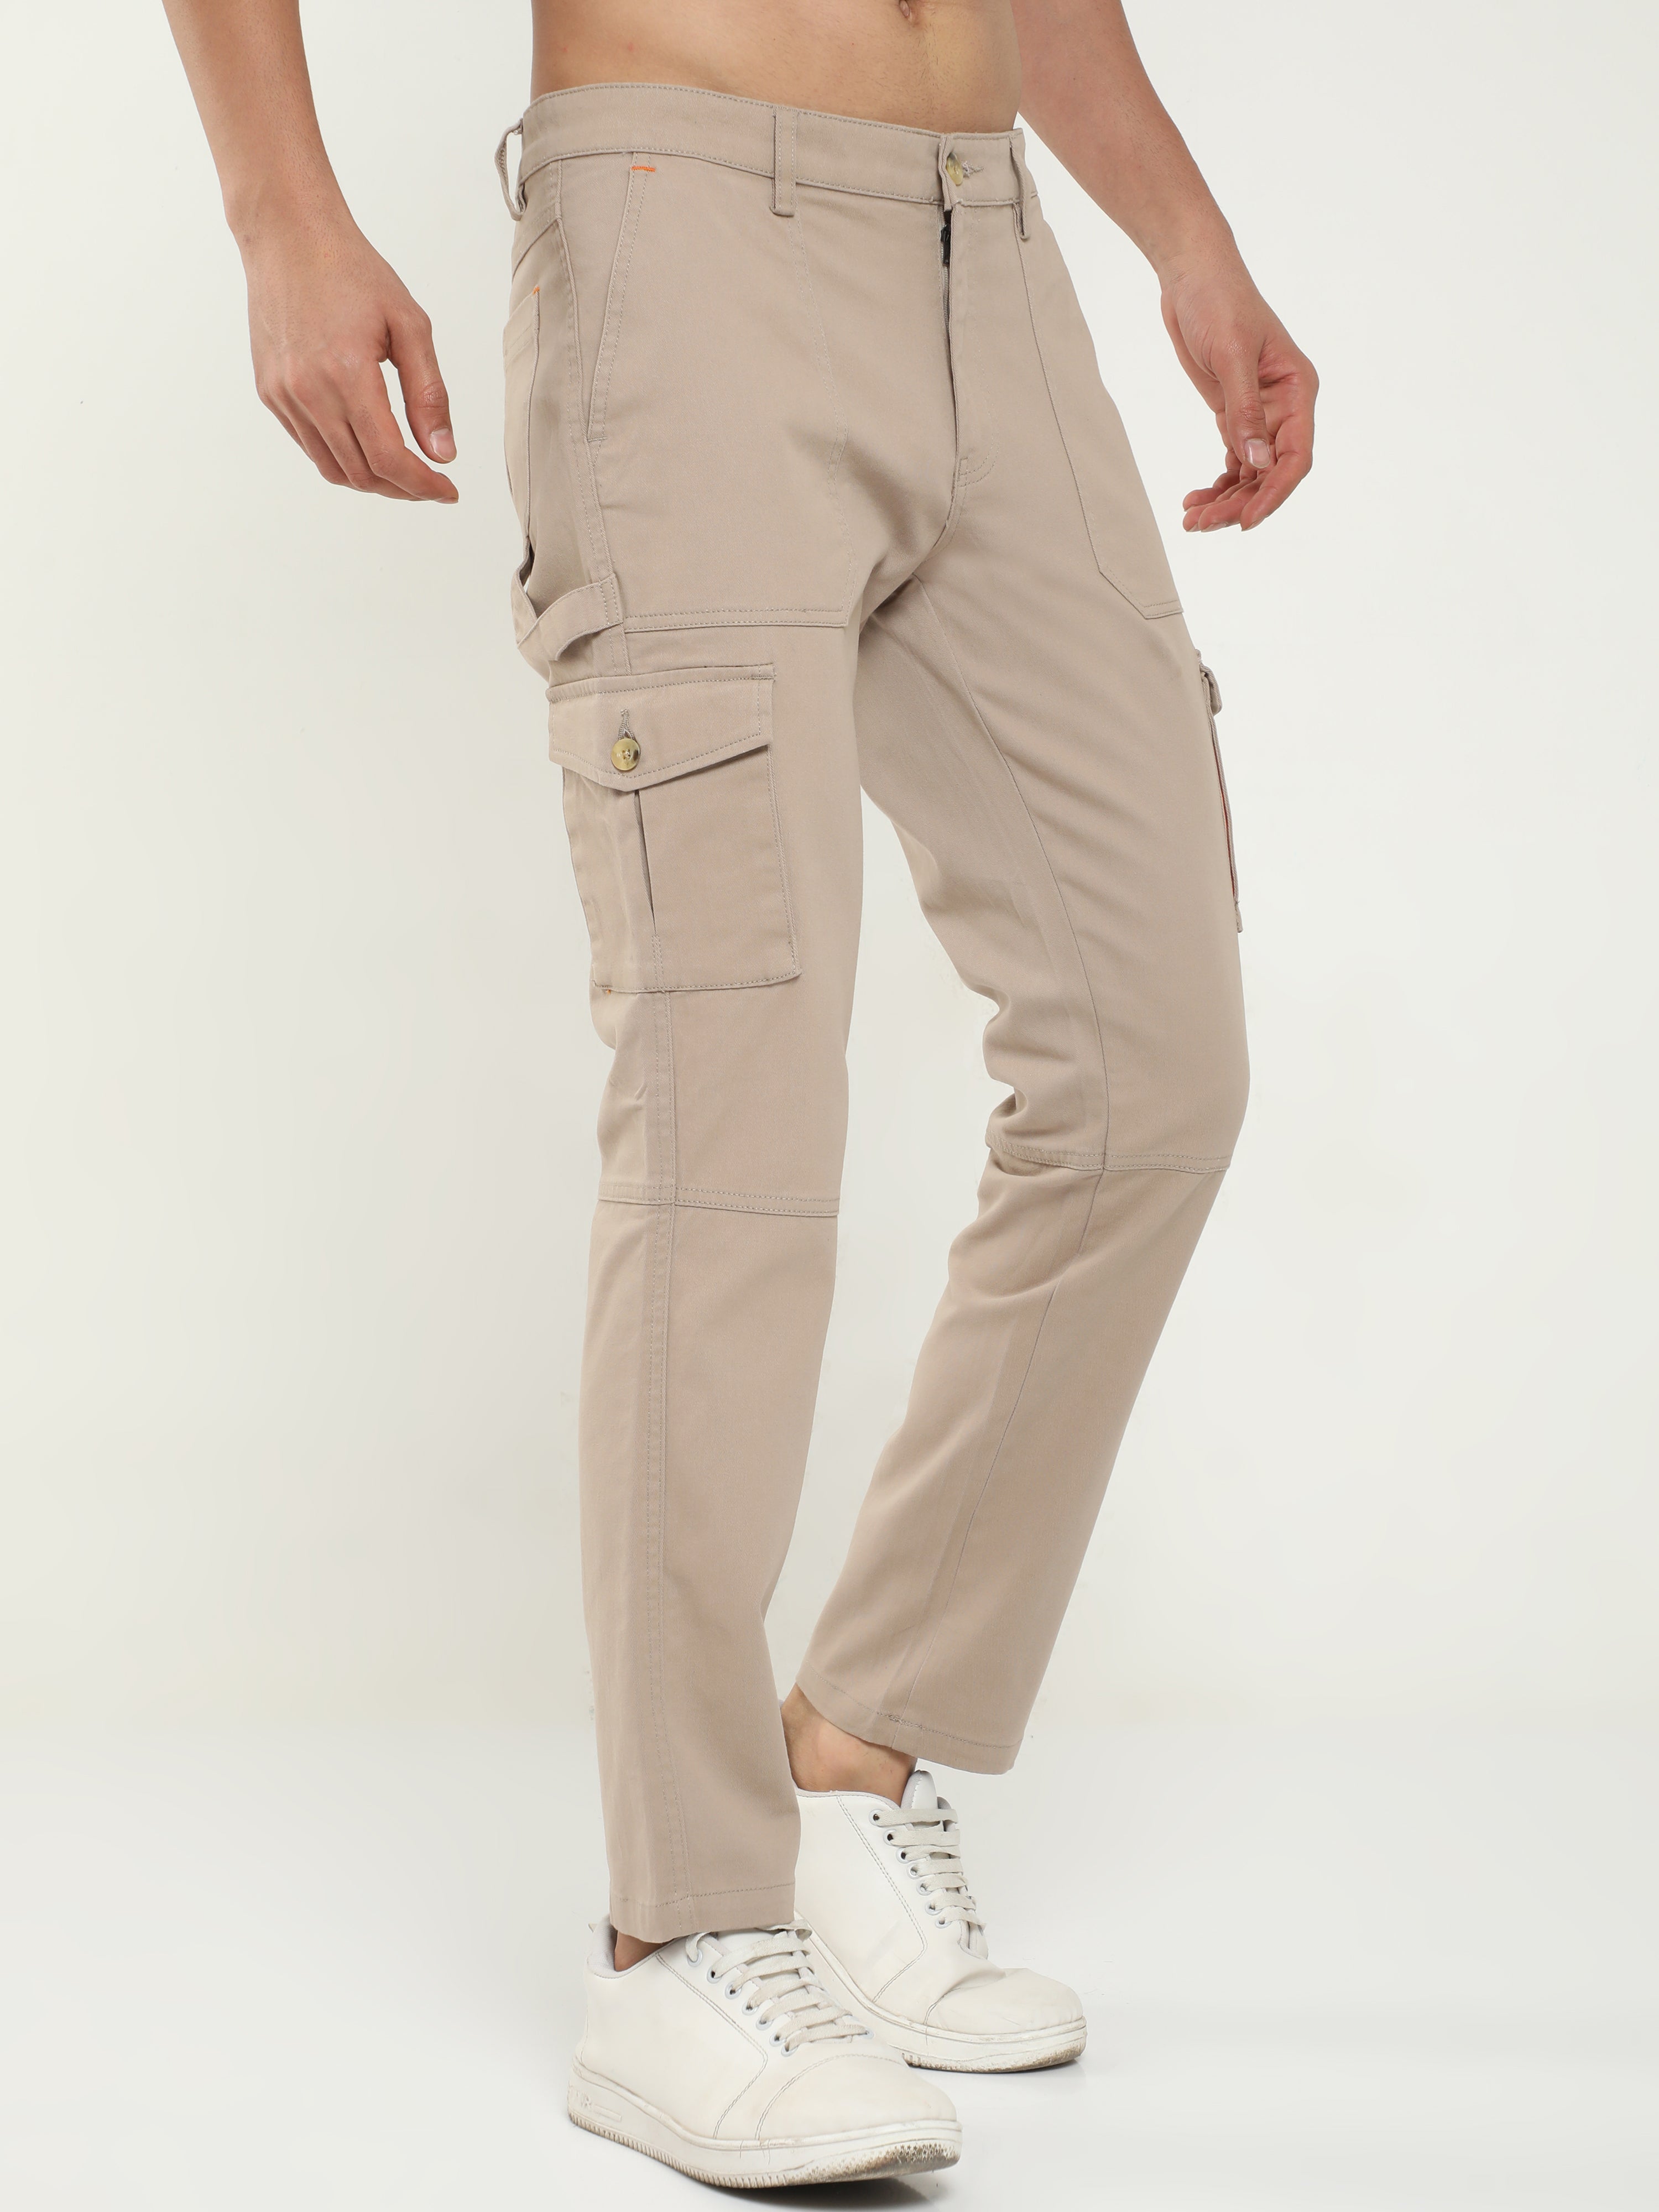 Brown Men's Latest Cotton Cargo Pant with Six Pockets